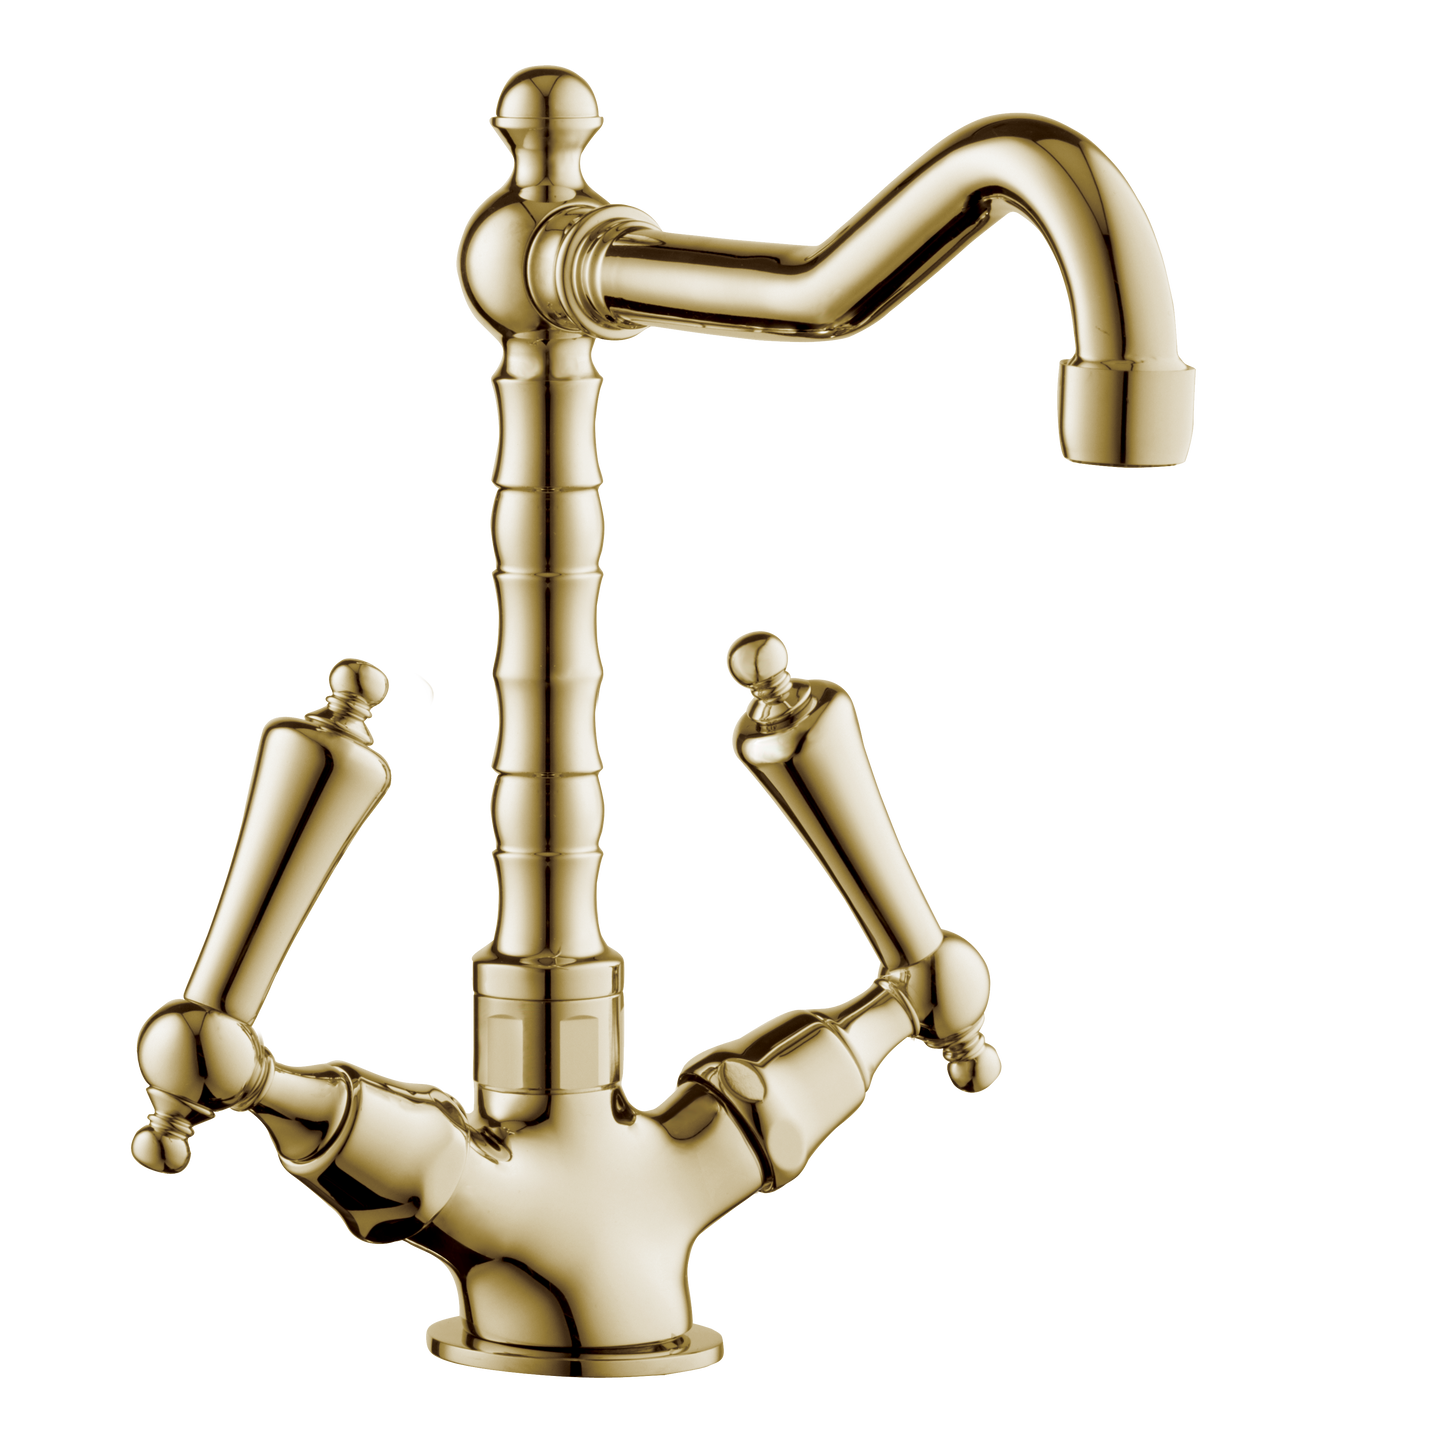 Country Kitchen Tap - Porcelain levers